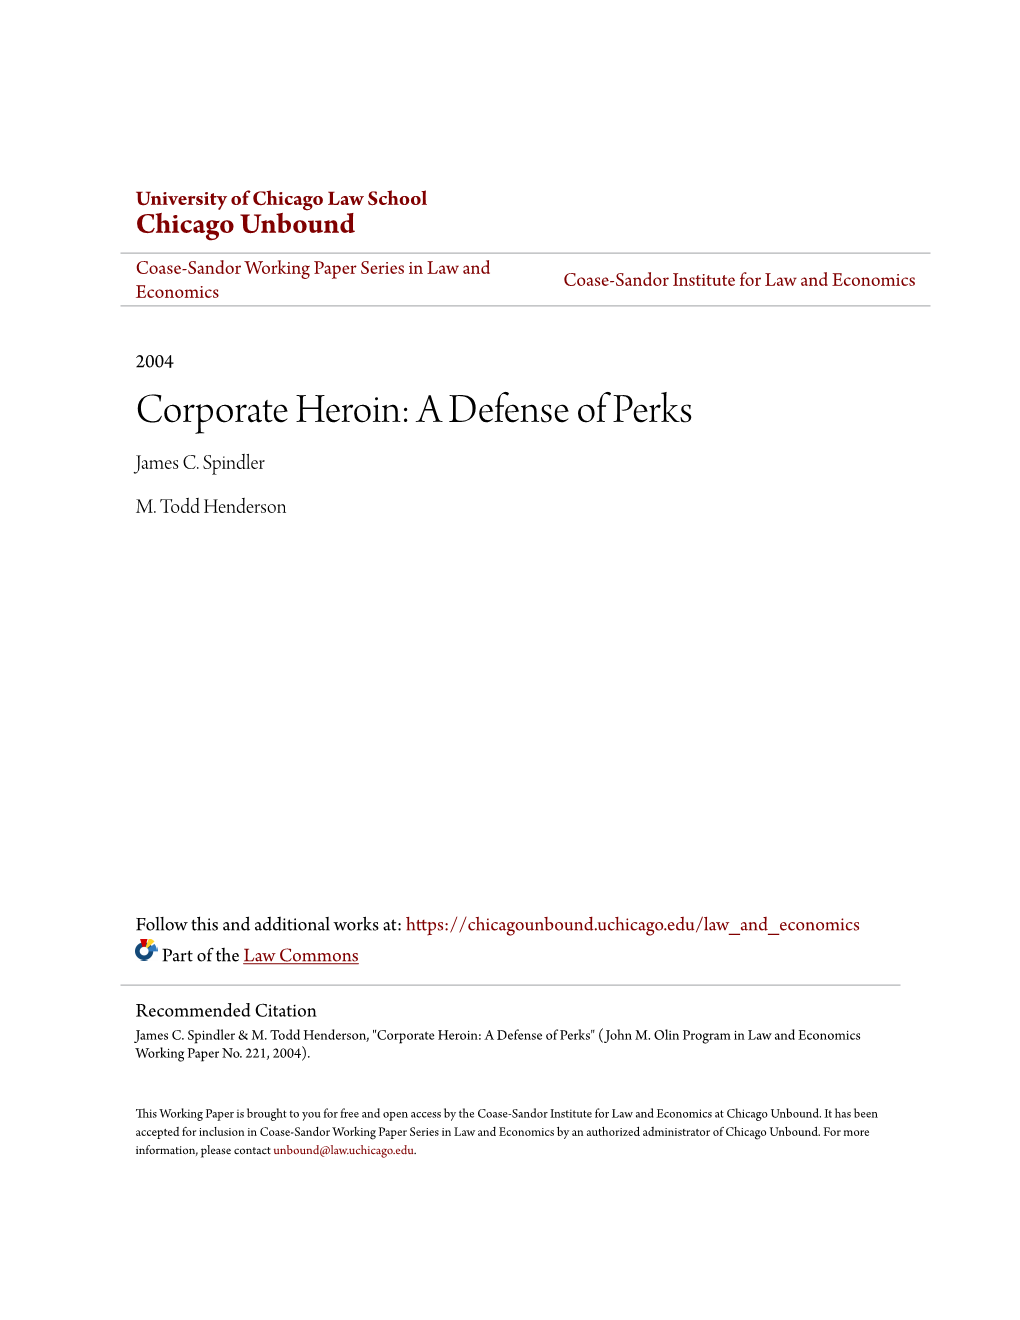 Corporate Heroin: a Defense of Perks James C